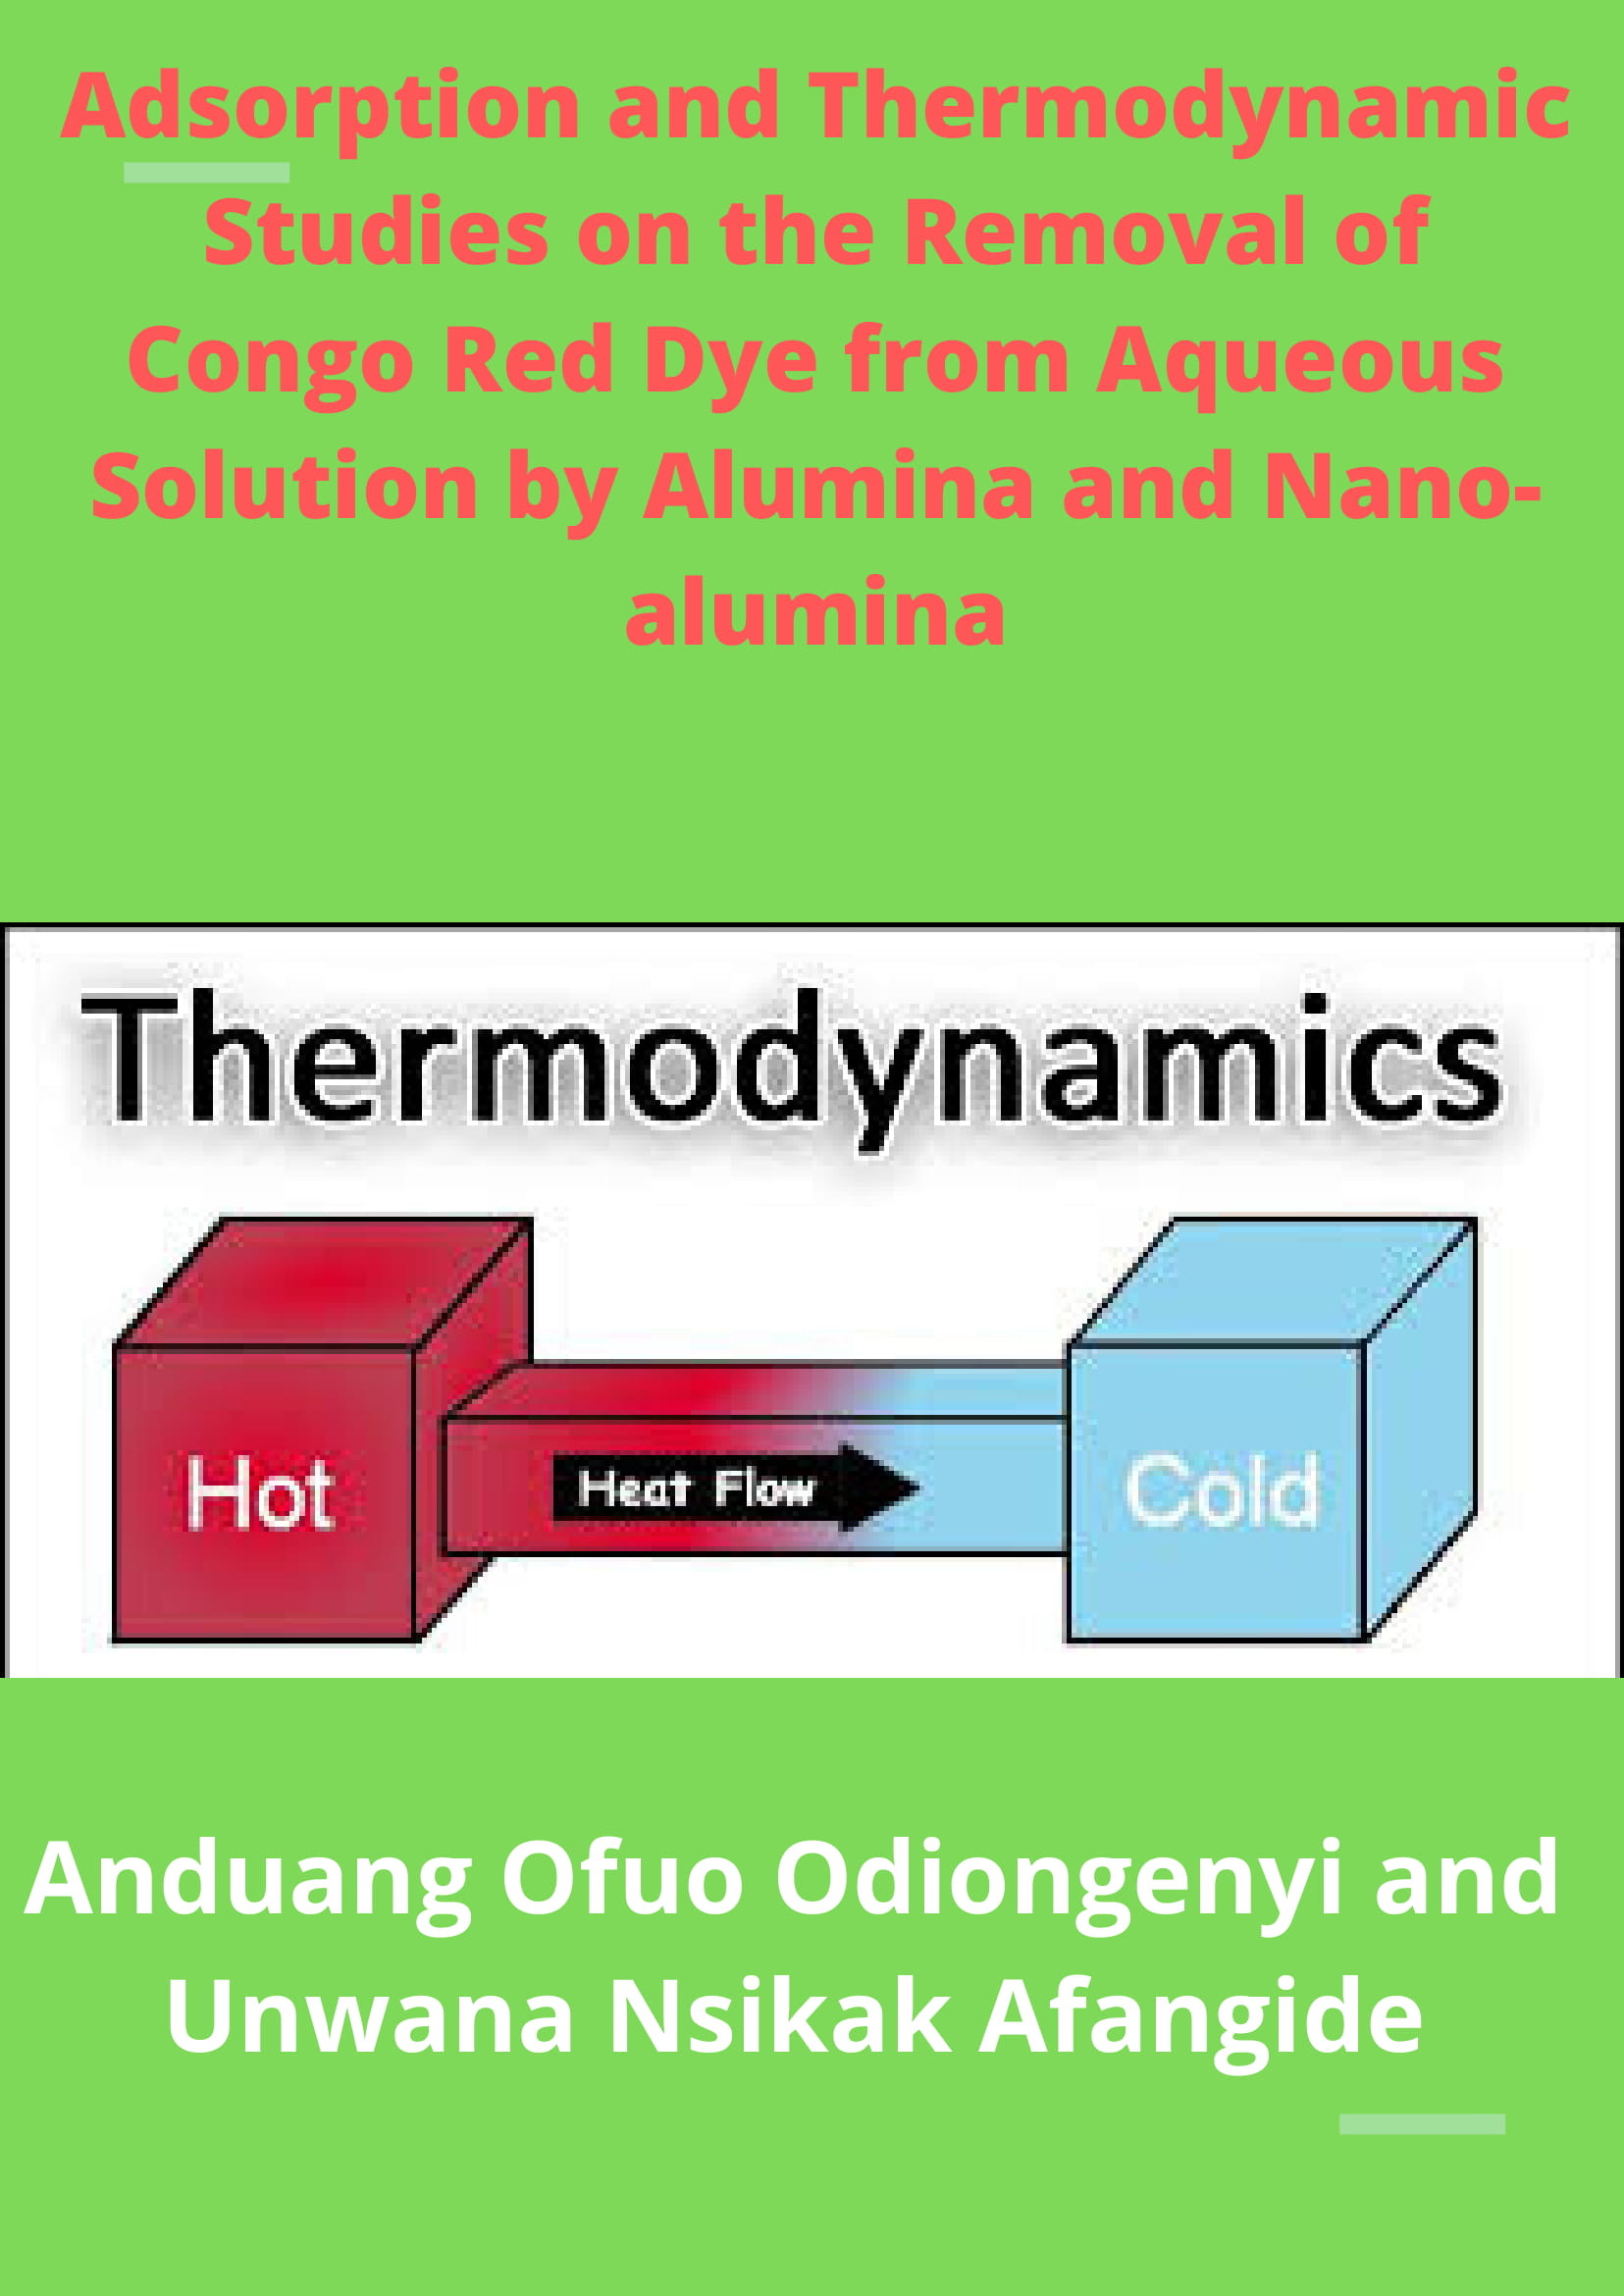 Adsorption and Thermodynamic Studies on the Removal of Congo Red Dye from Aqueous Solution by Alumina and Nano-alumina image